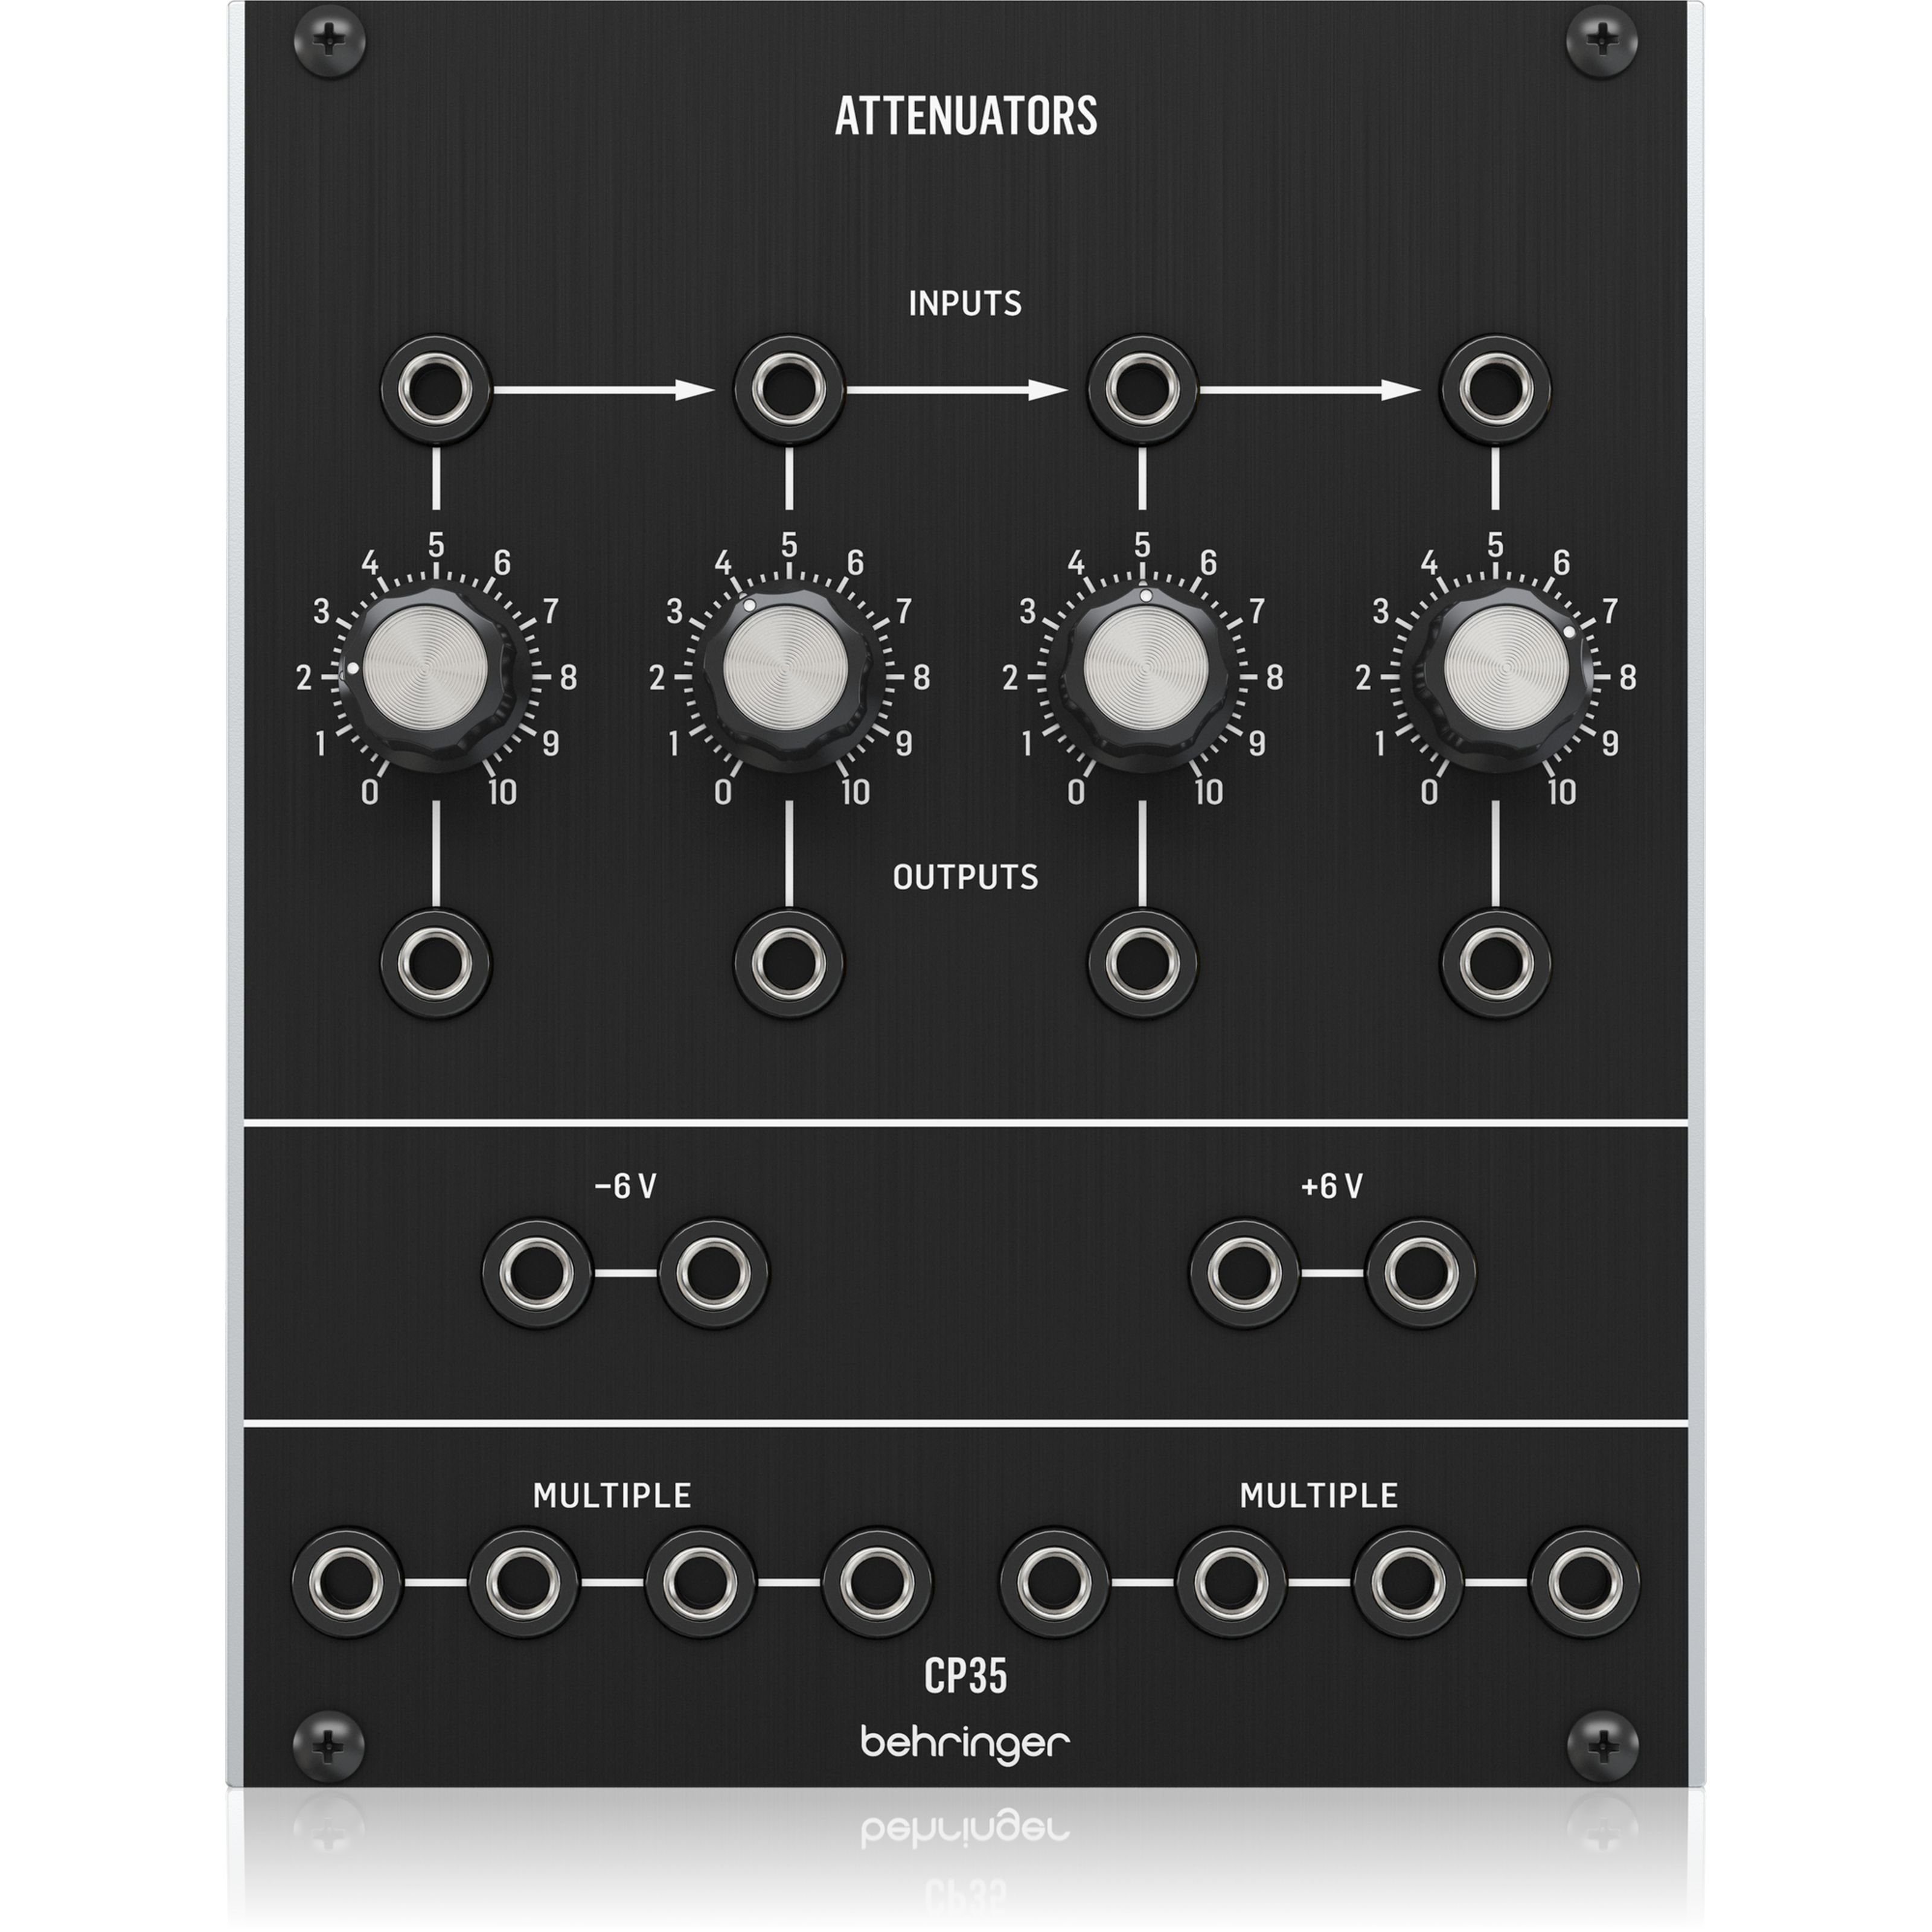 Behringer Synthesizer (CP35 Attenuators), CP35 Attenuators - Attenuator Modular Synthesizer